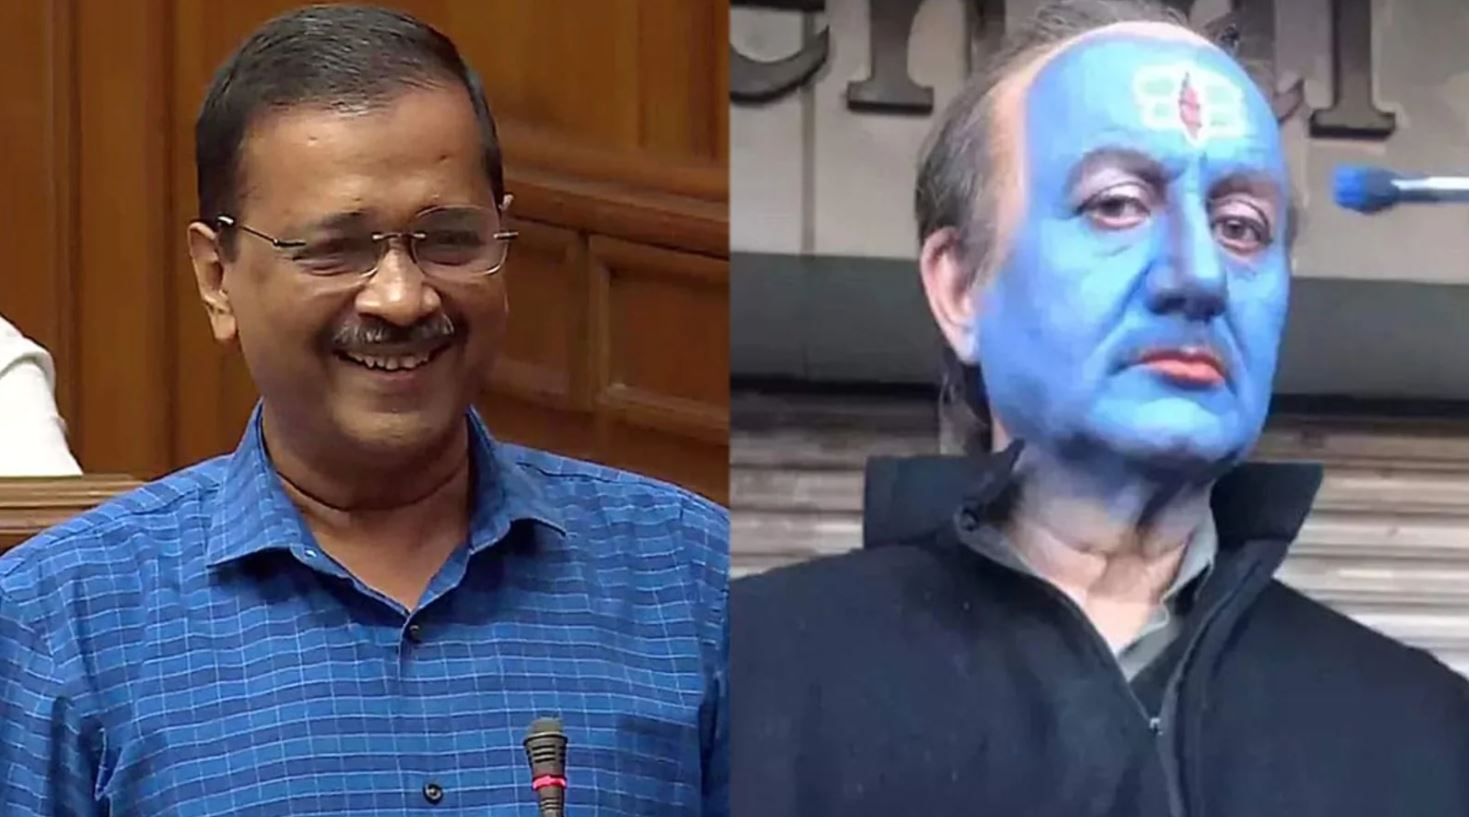 The Kashmir Files Movie: Anupam Kher reacts to Arvind Kejriwal's statement on his latest film  